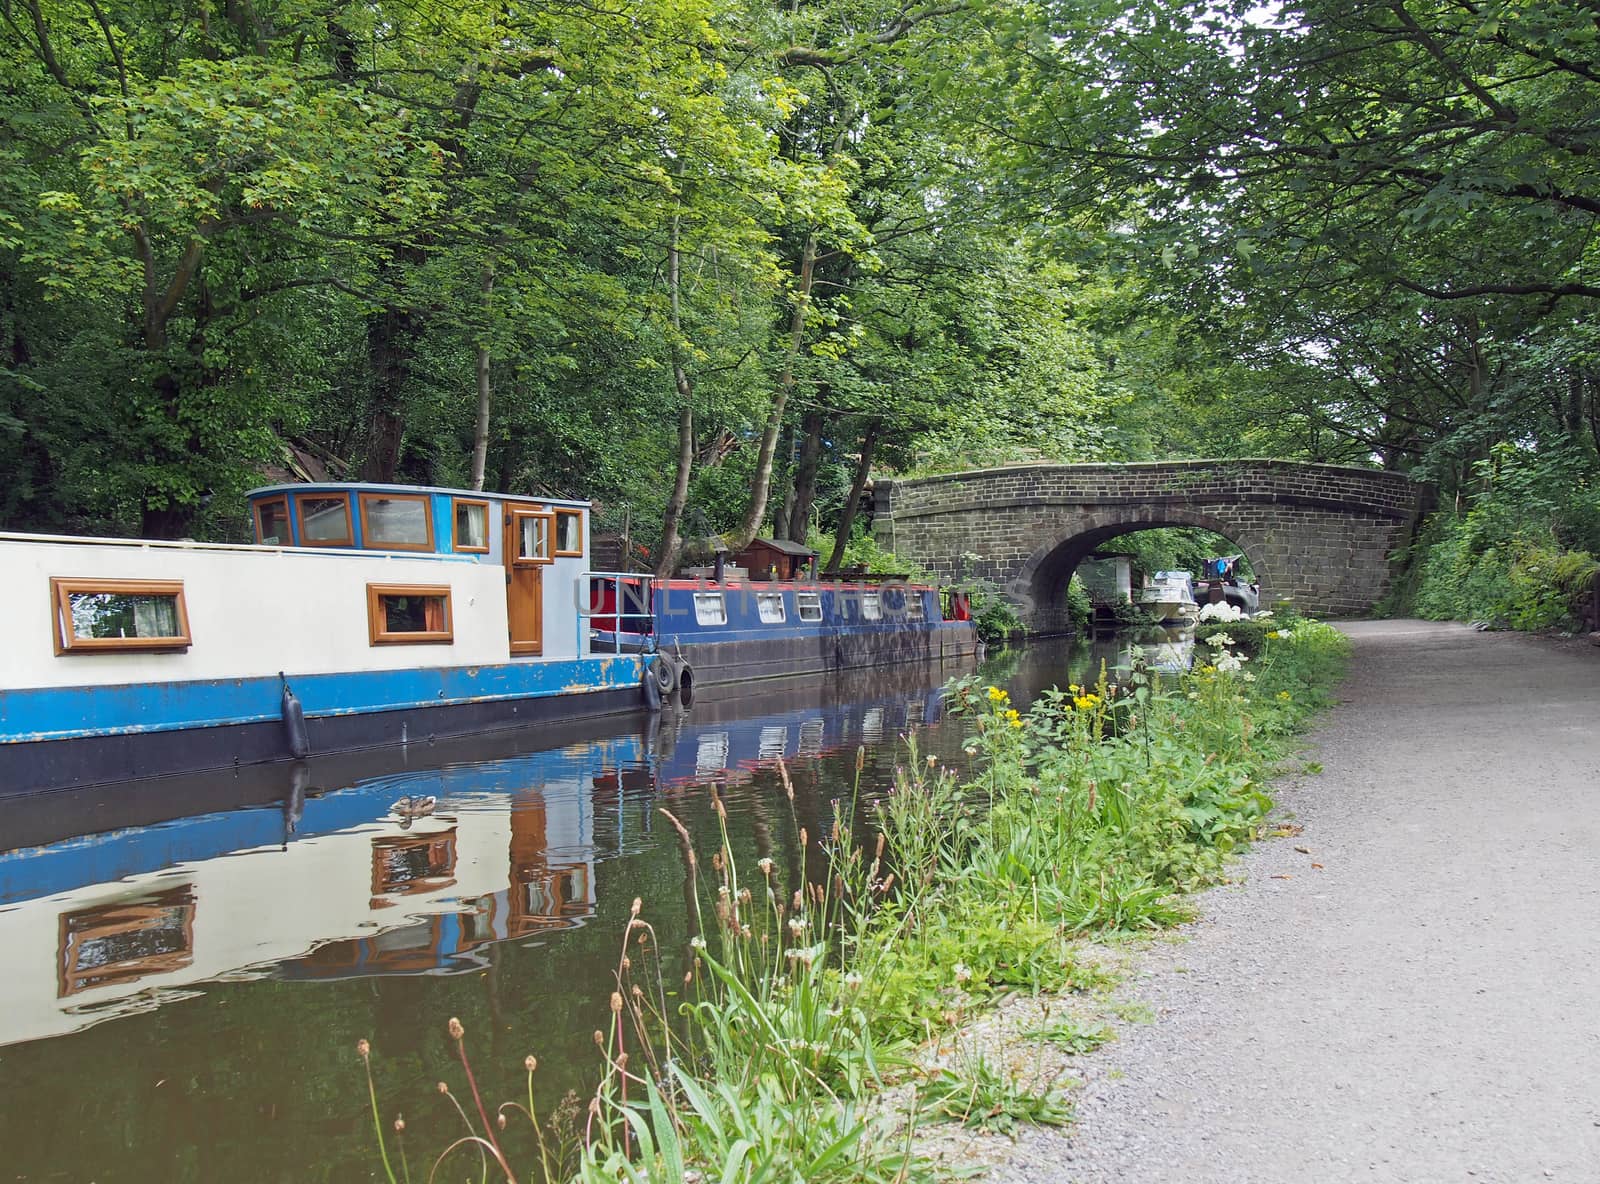 narrow boats and barges moored on the rochdale canal in hebden bridge bext to an old stone footbridge surrounded by green summer trees